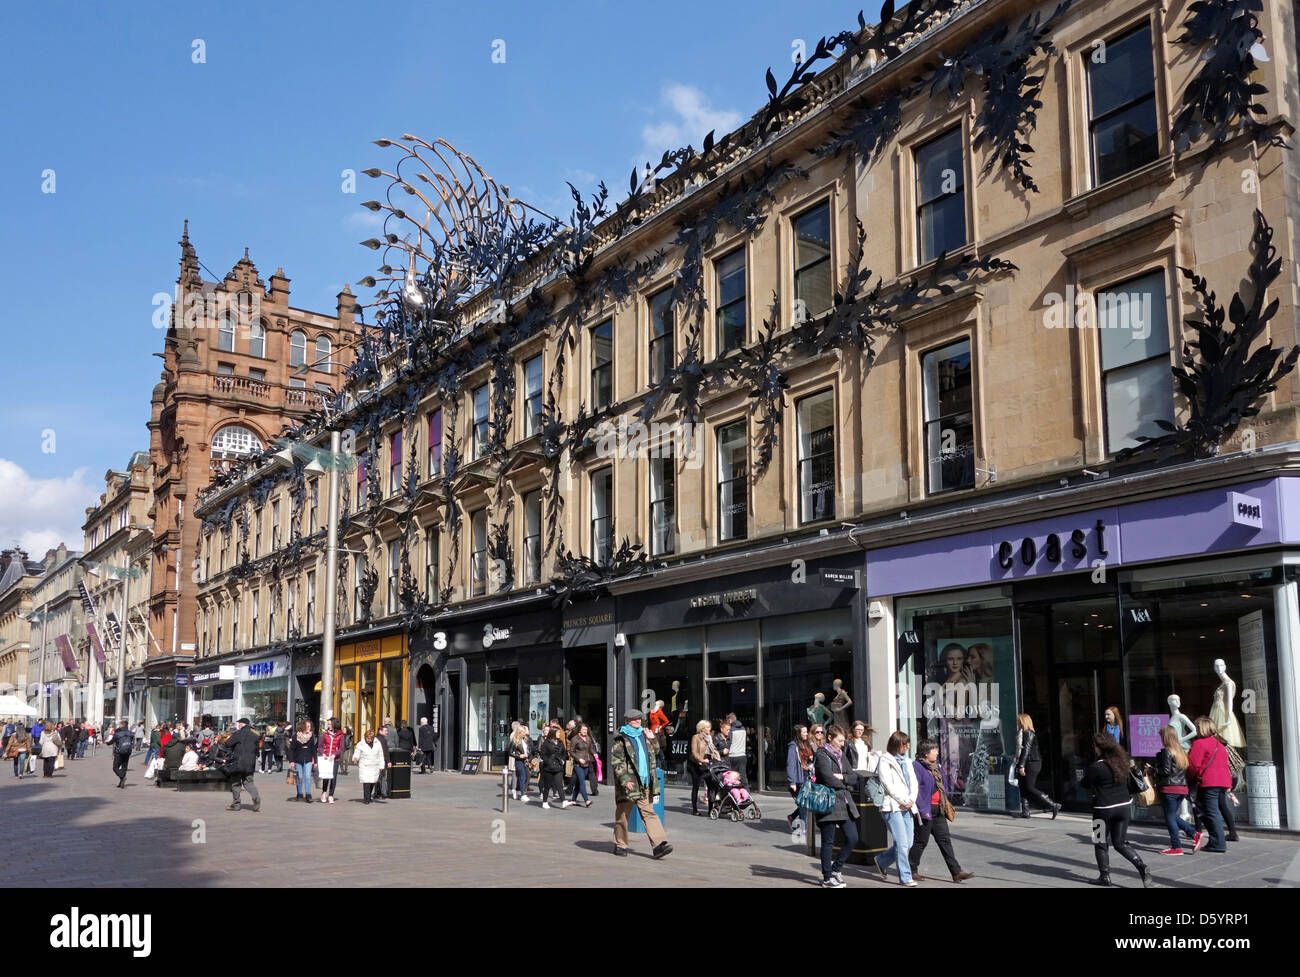 Shoppers and visitors in Buchanan Street at the Princes Square entrances in Glasgow Scotland on a sunny spring day Stock Photo